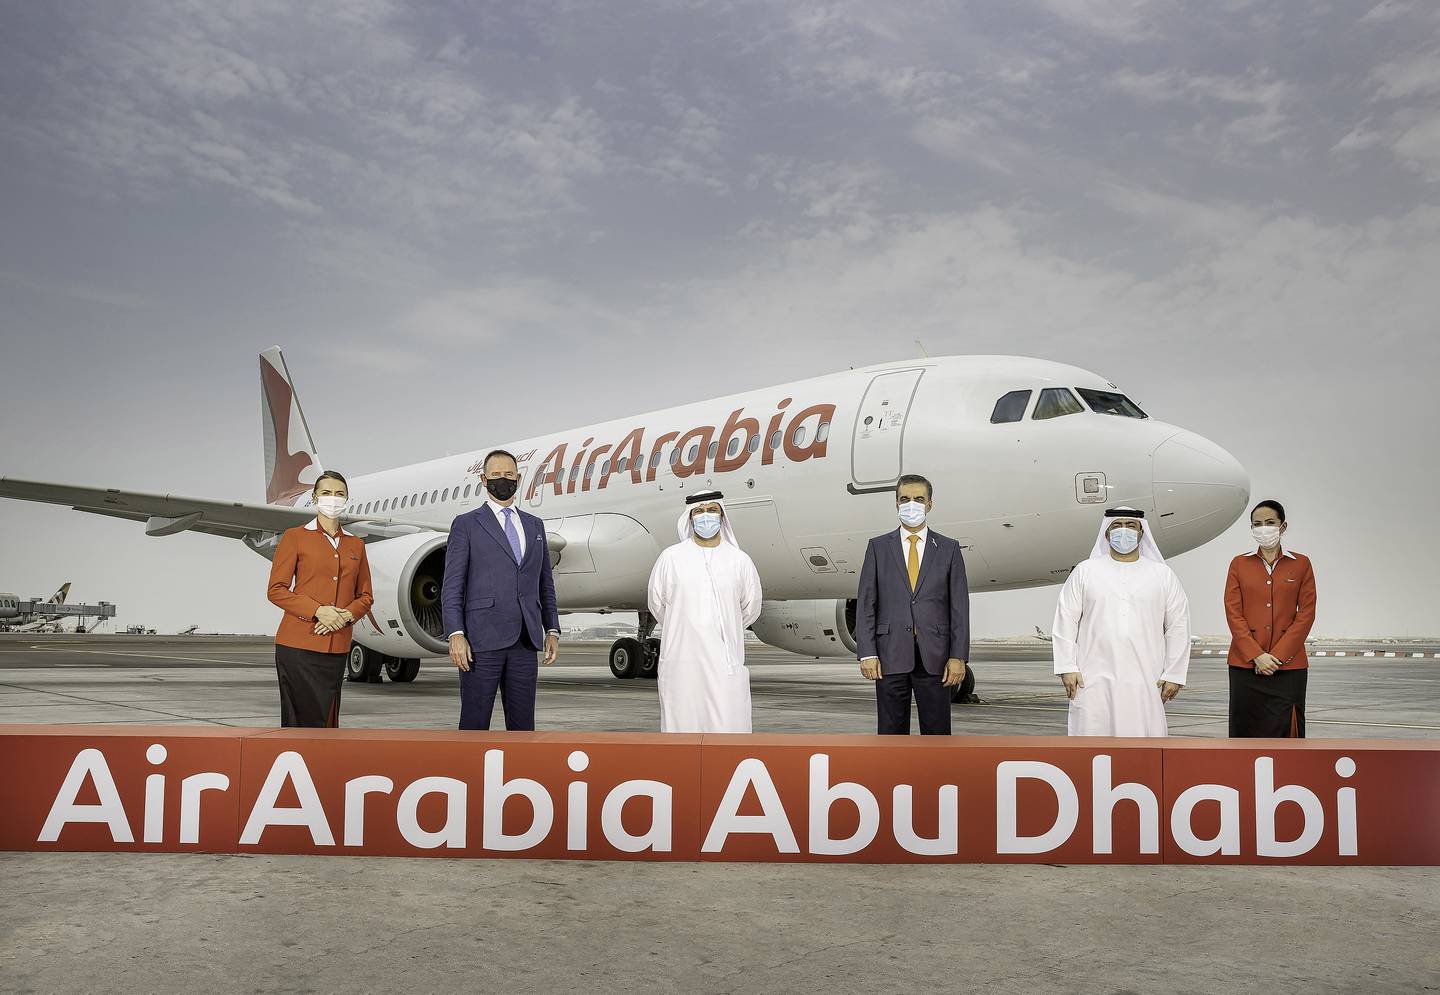 Air Arabia Abu Dhabi takes to the skies with an inaugural flight to Egypt in July 2020. Photo: Air Arabia